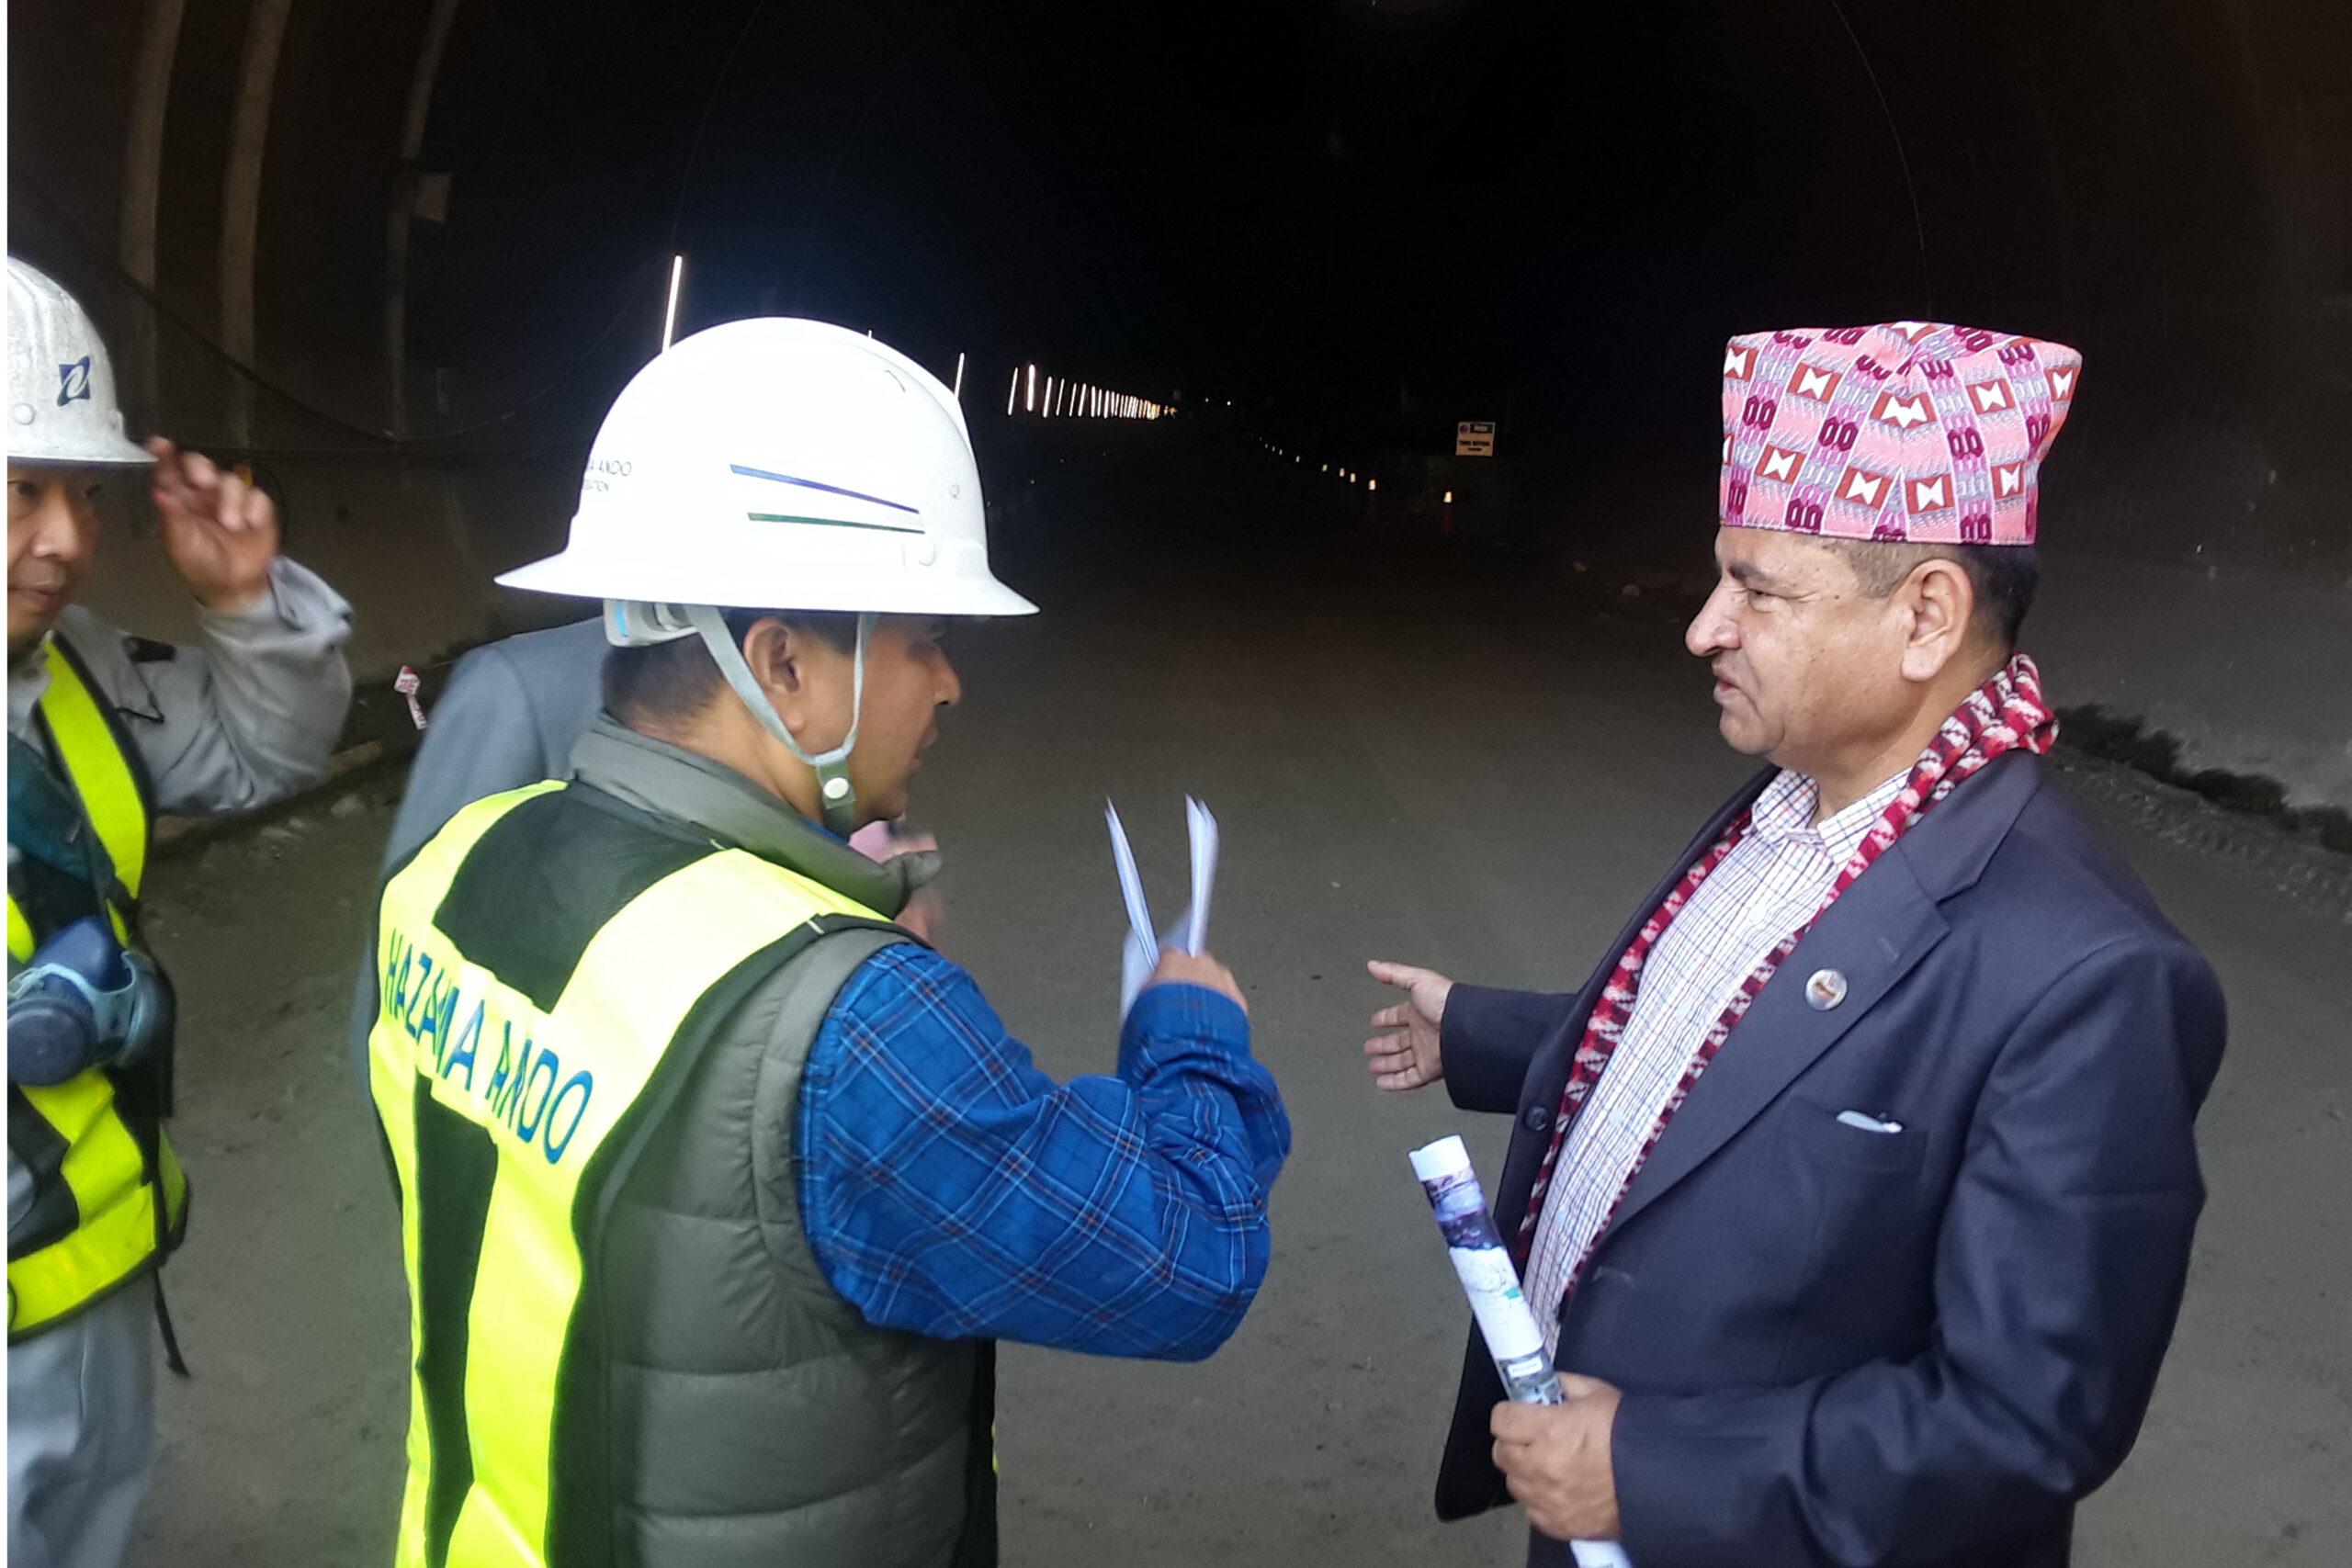 Nagdhunga Tunnel Way work will be expedited ensuring vehicles to ply within a year: Minister Jwala